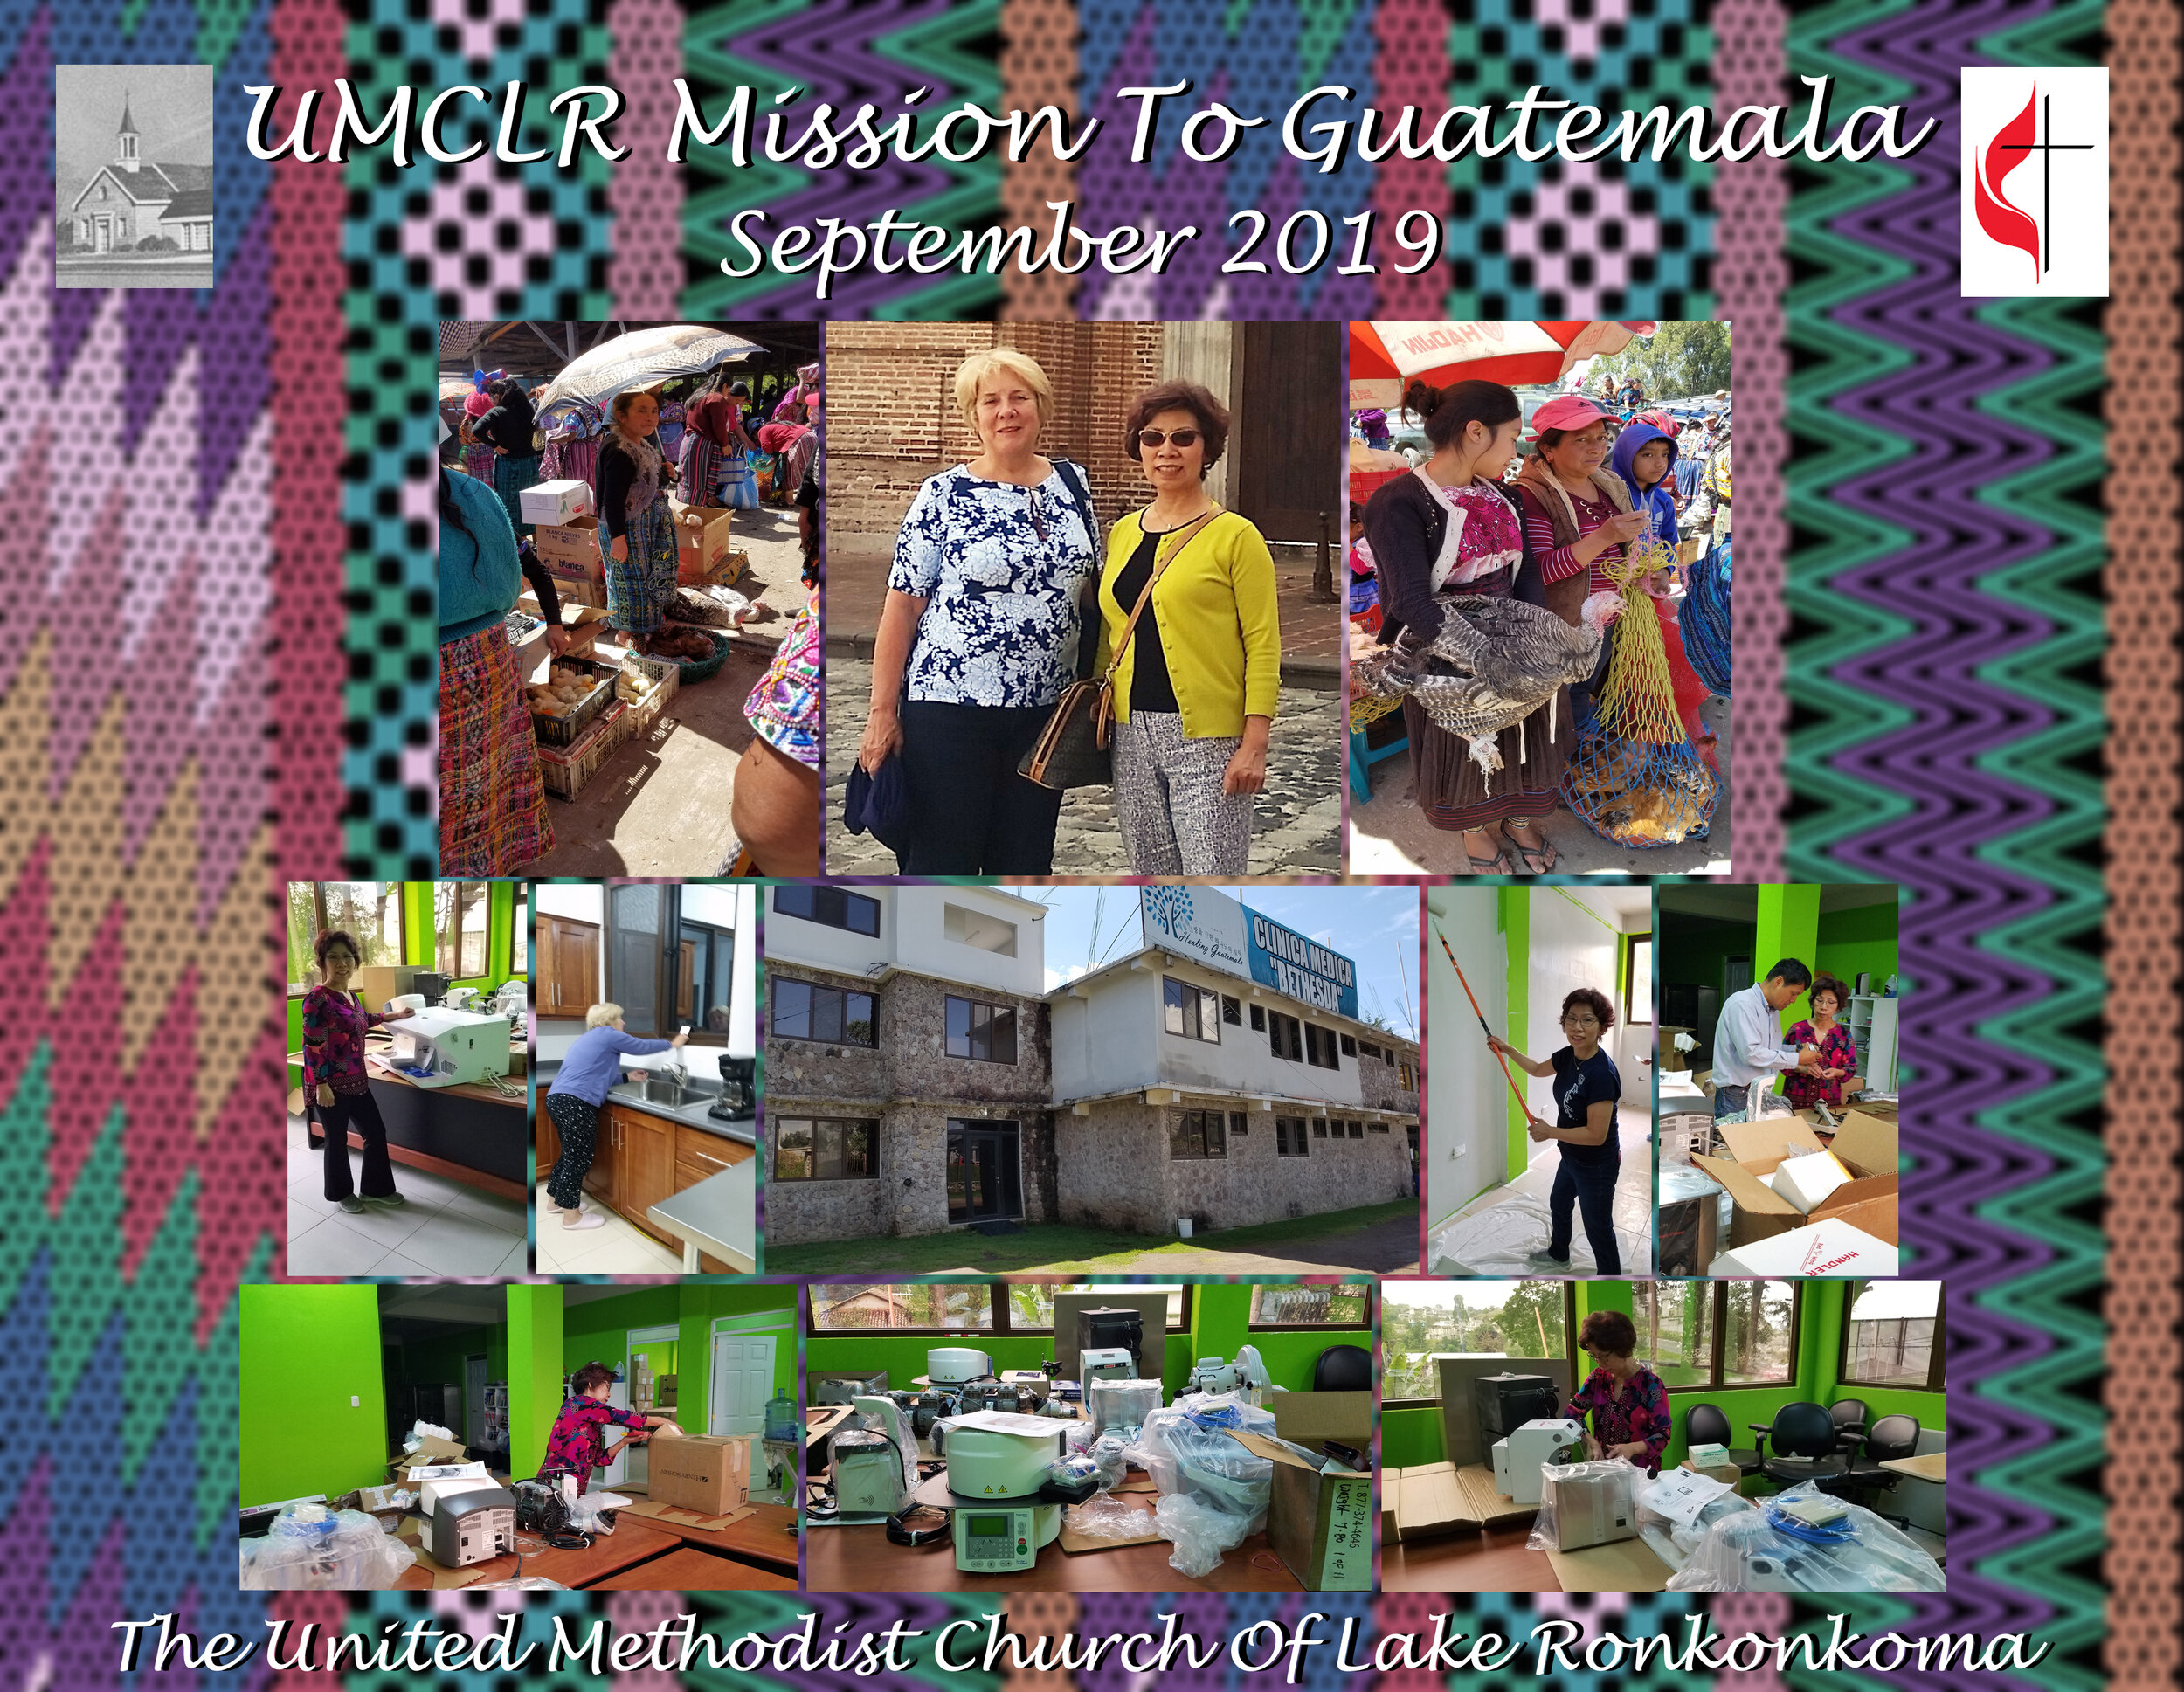 21a-09-2019 Mission to Guatemala.jpg